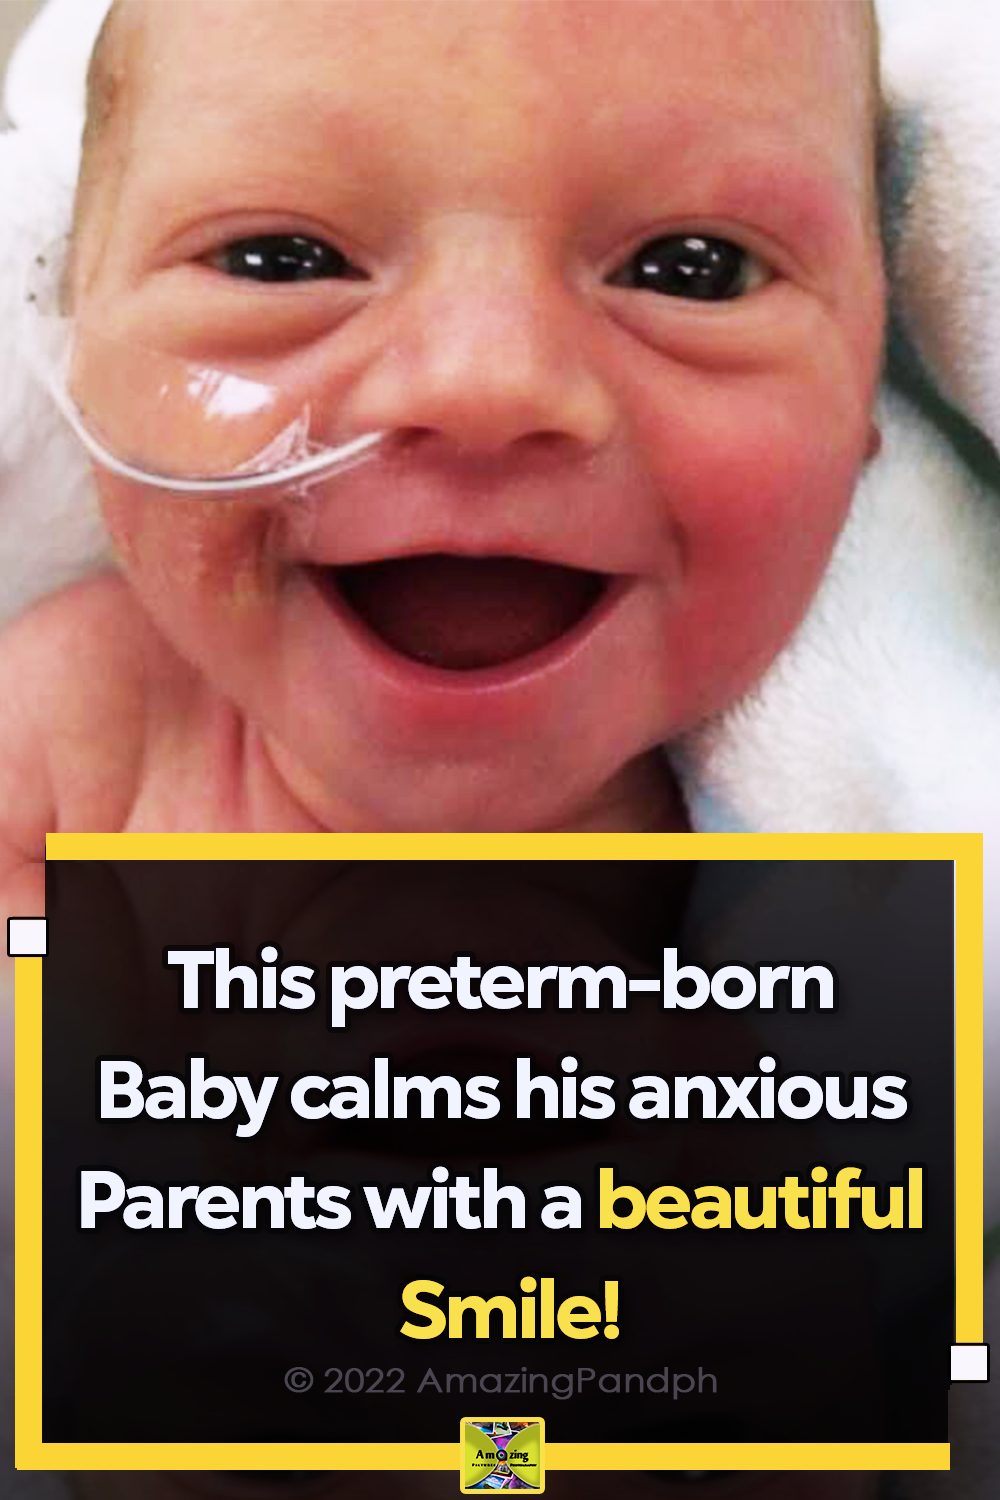 premature, baby, parents, smile, hope, life, birth, grin, beautiful smile,